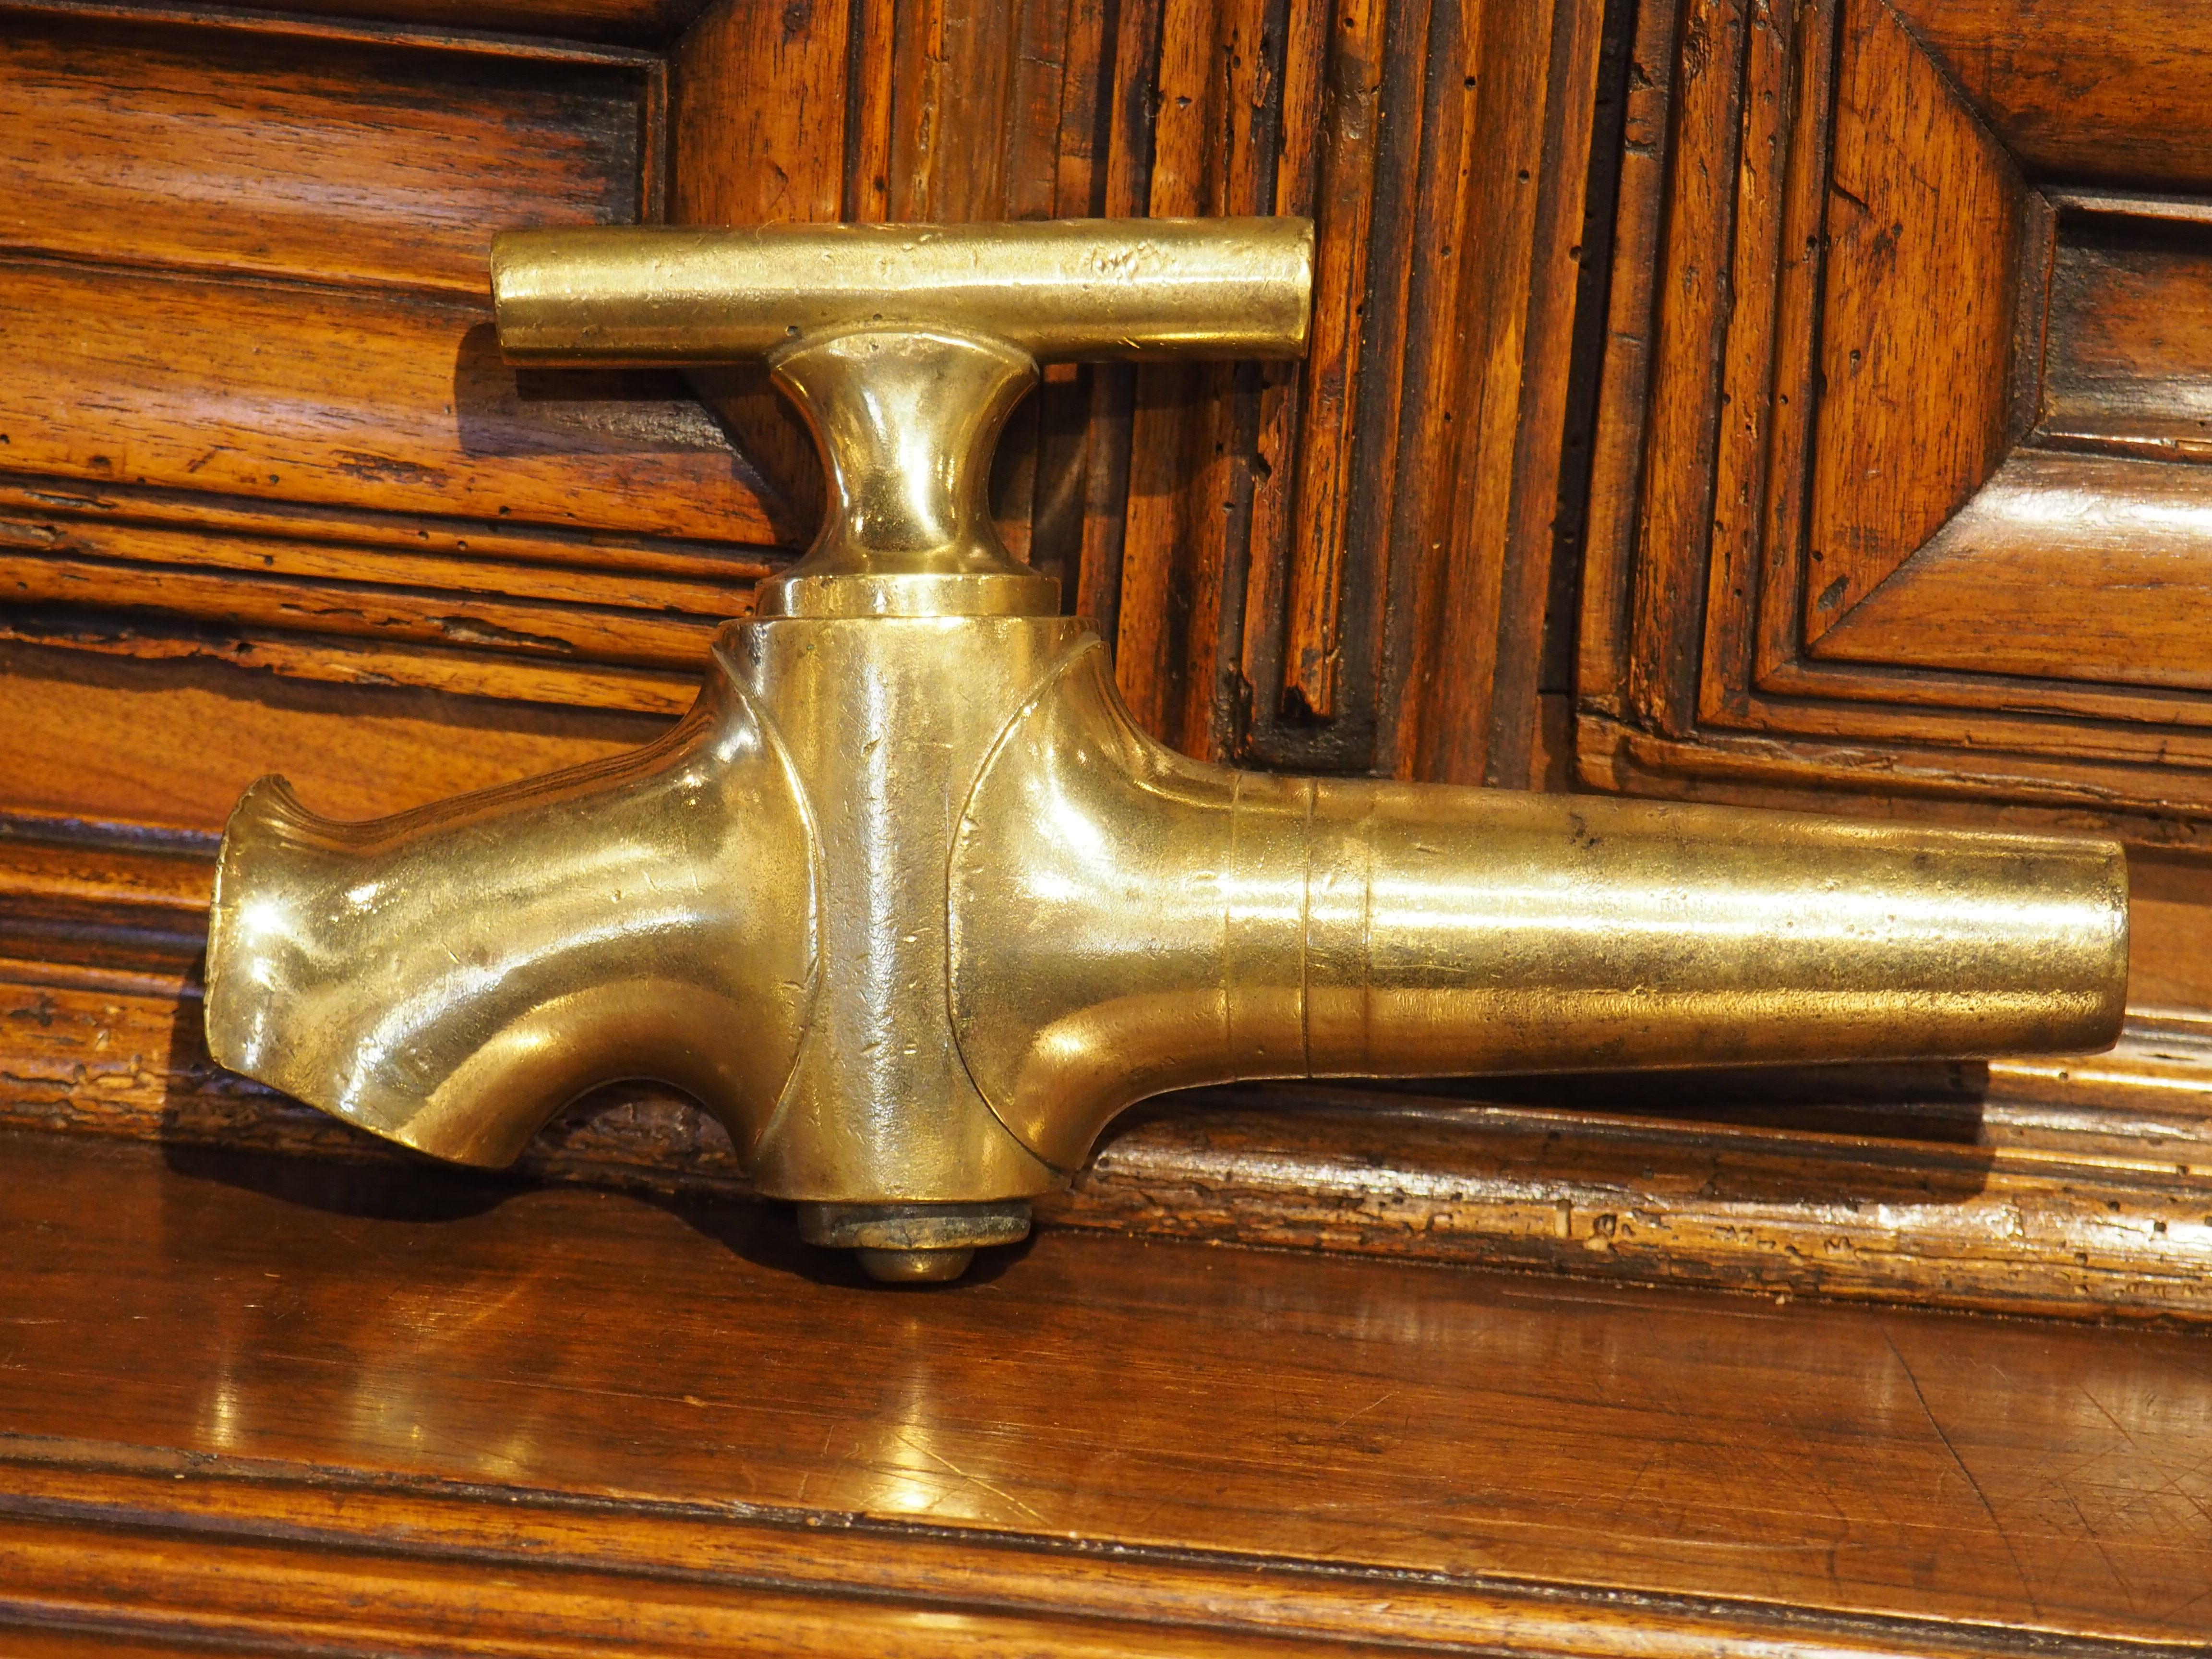 This antique bronze wine barrel spout from France dates to the 1800s. Most likely used in a traditional foudre barrel, the spout played an integral role in the winemaking process, managing the flow of wine with precision and care. The corner joint